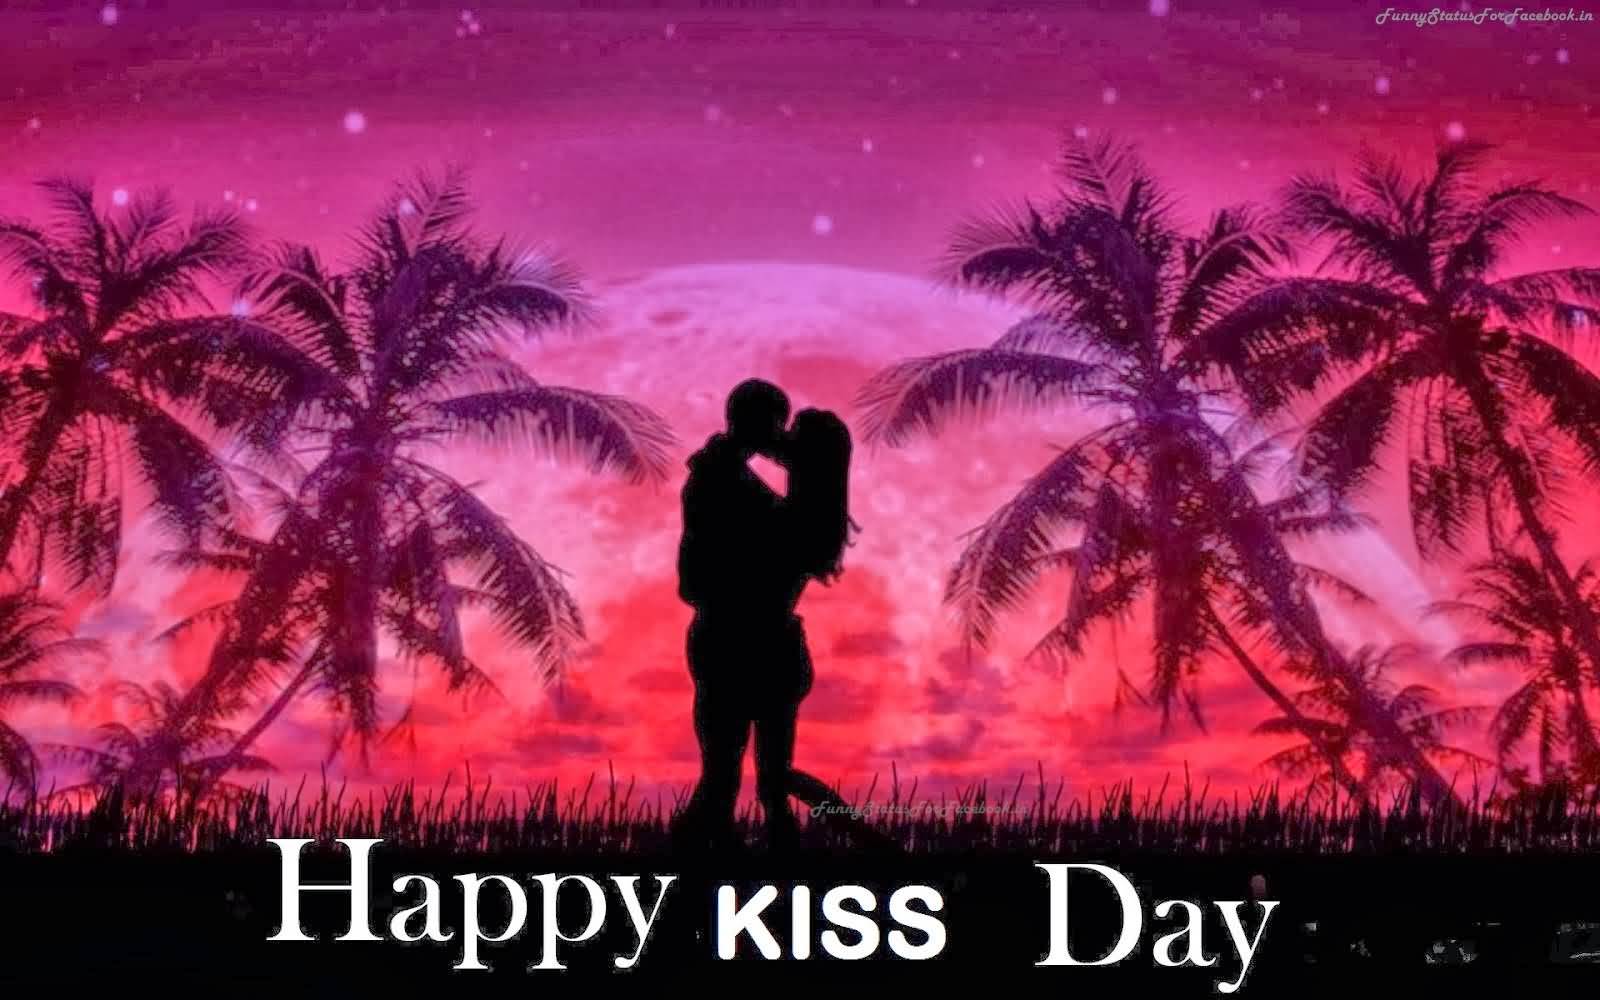 Happy Kiss Day Kissing On Beach Greeting Card